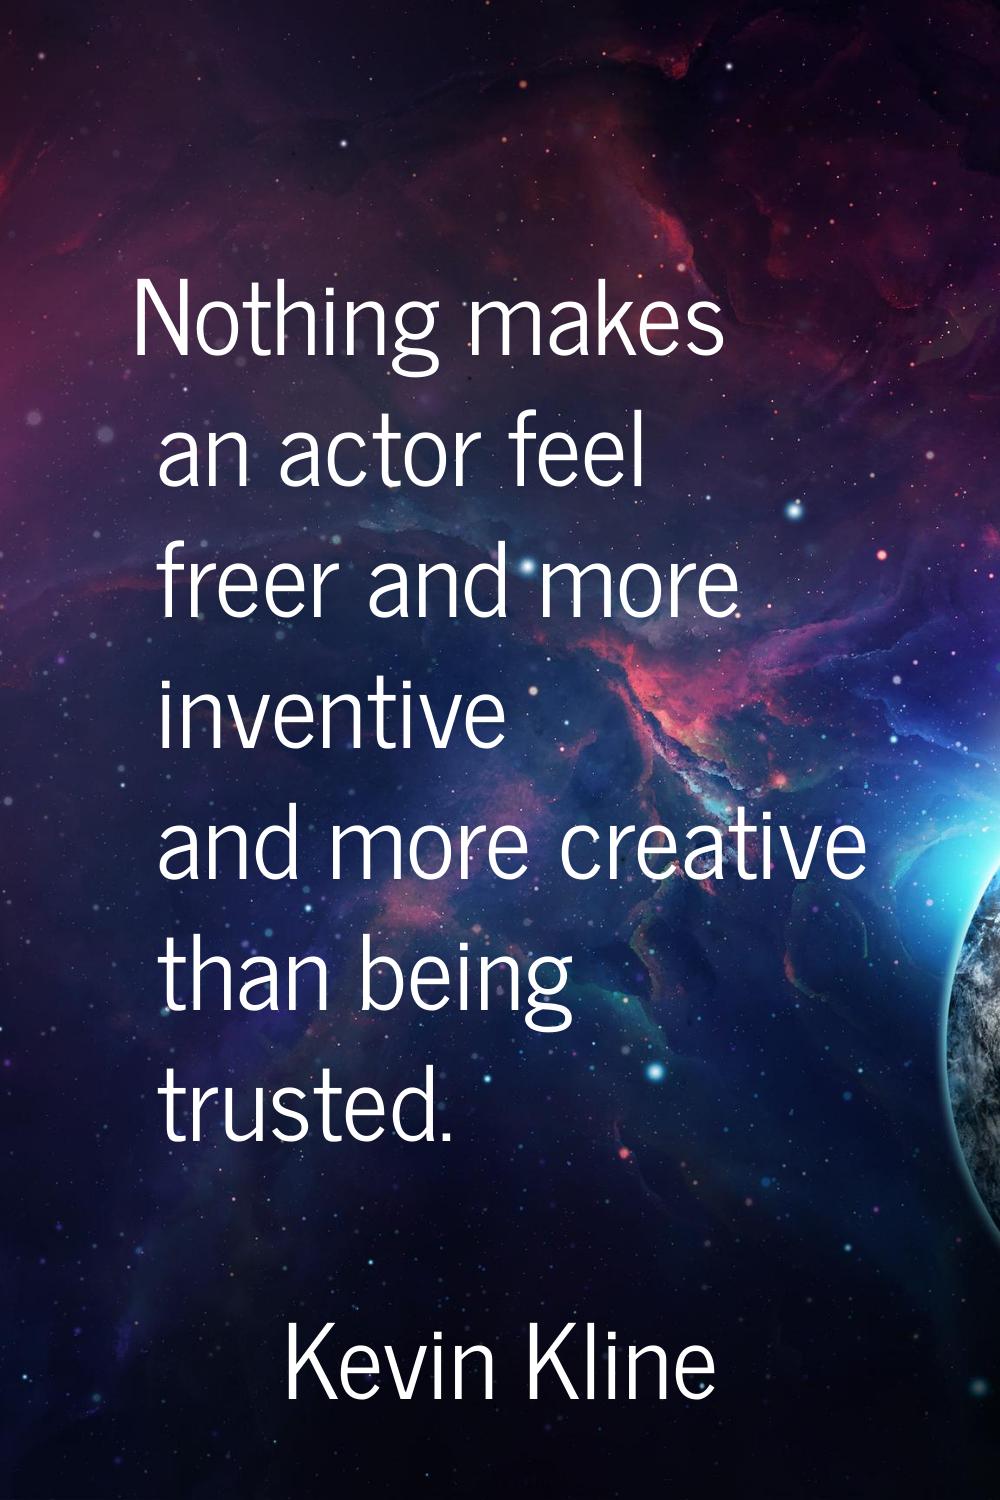 Nothing makes an actor feel freer and more inventive and more creative than being trusted.